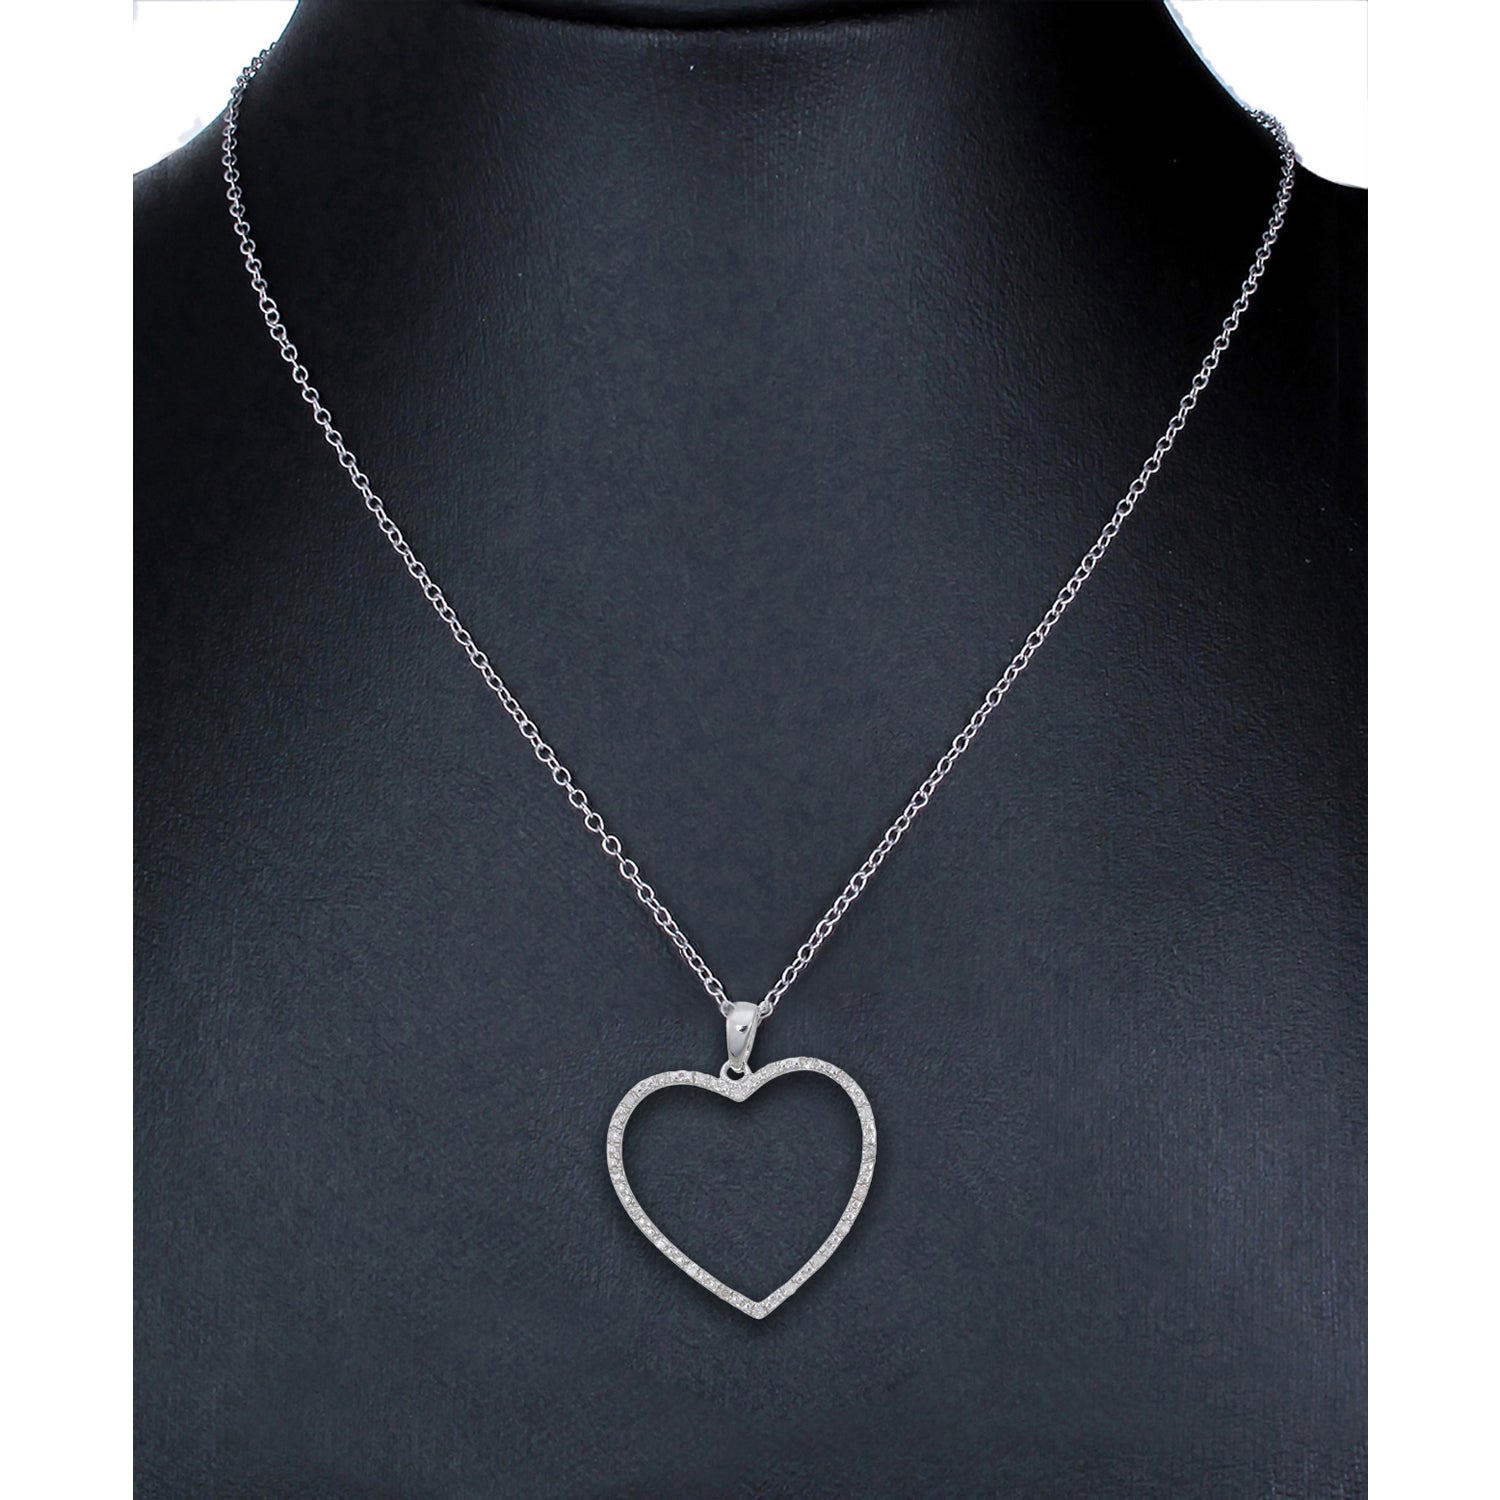 1/8 cttw Diamond Pendant, Diamond Heart Pendant Necklace for Women in .925 Sterling Silver with Rhodium, 18 Inch Chain, Prong Setting